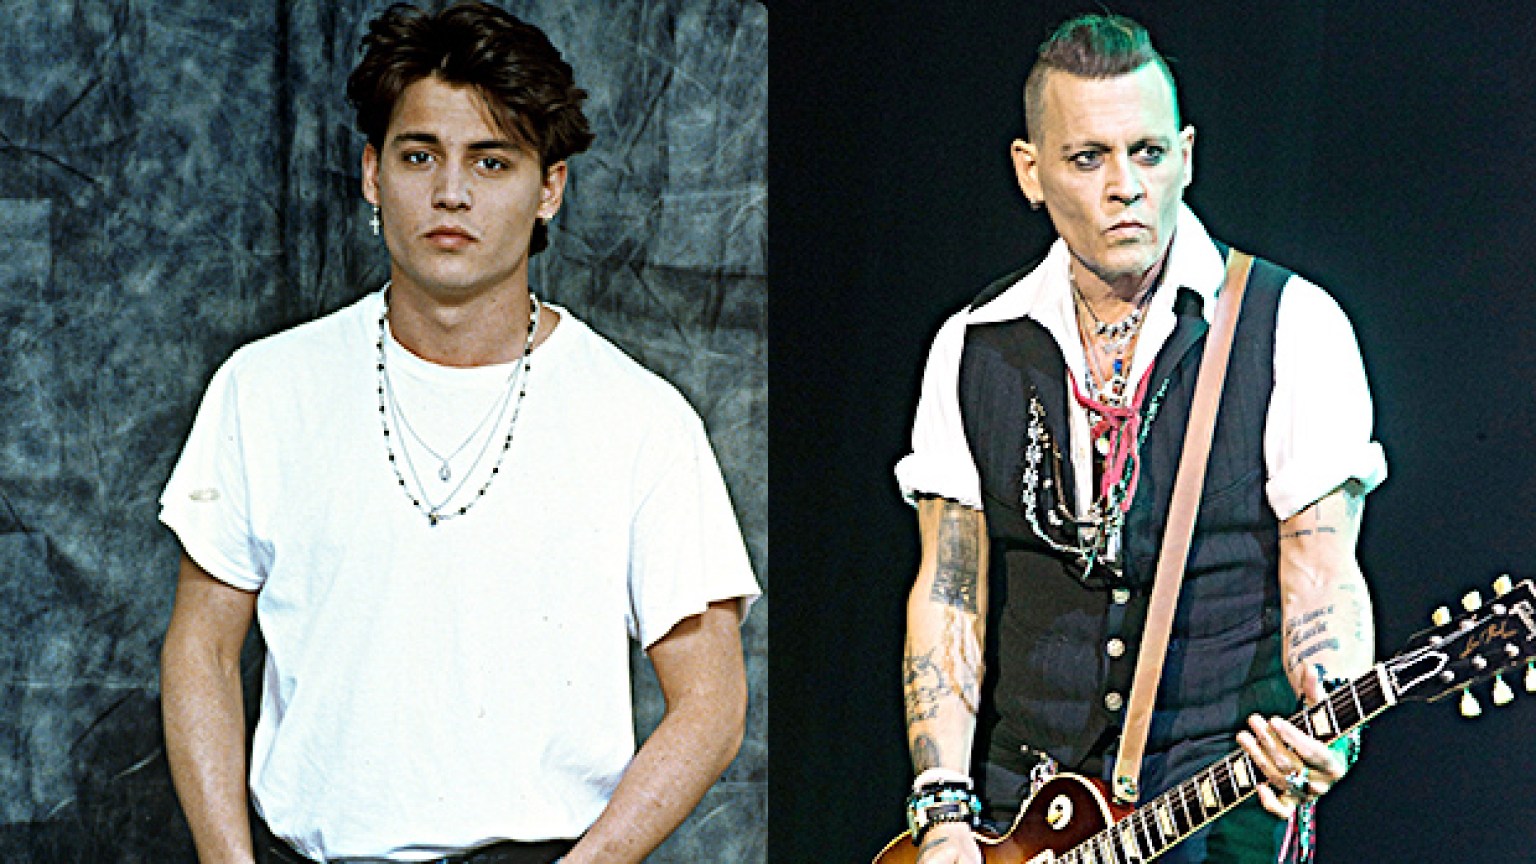 Johnny Depp’s Transformation Weight Loss & Change Over Years